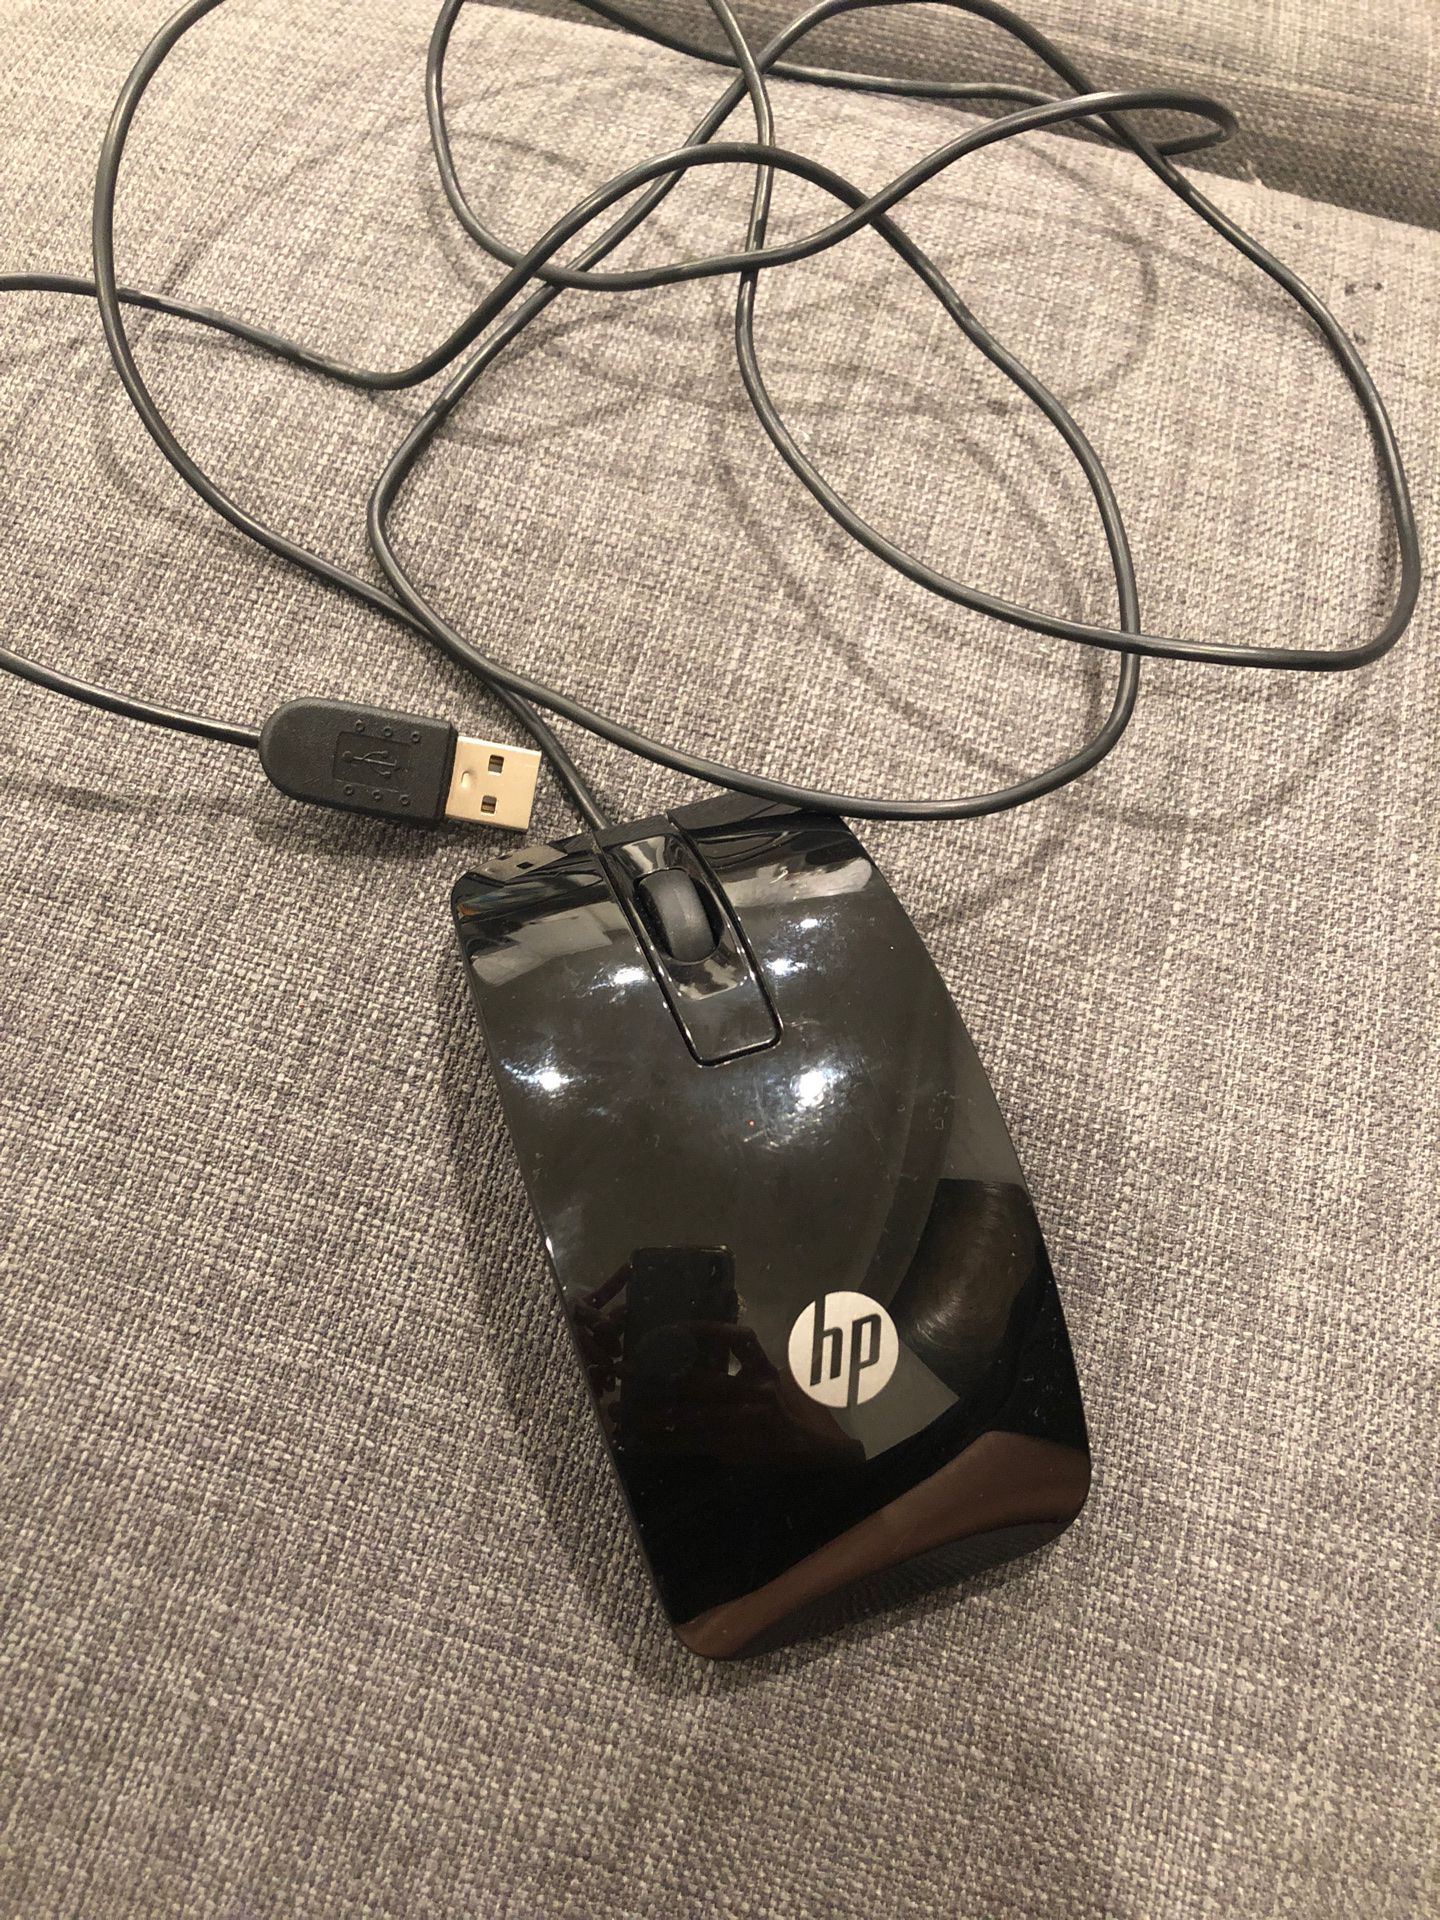 HP computer mouse